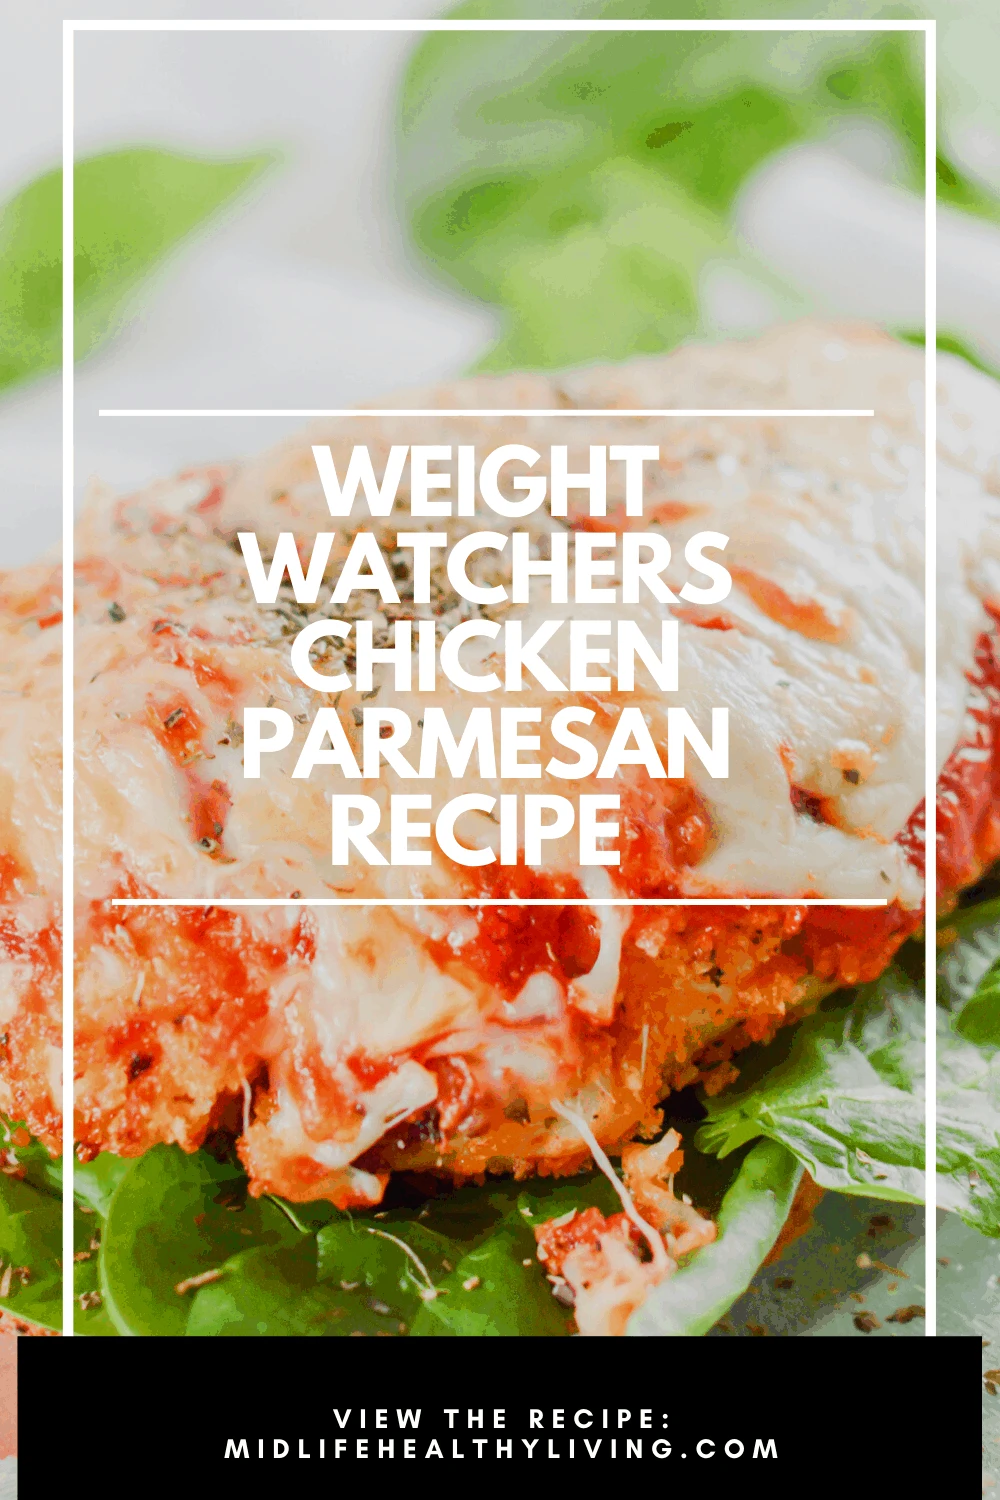 Here we see a pin showing the finished weight watchers chicken parmesan recipe with the title in the middle. 